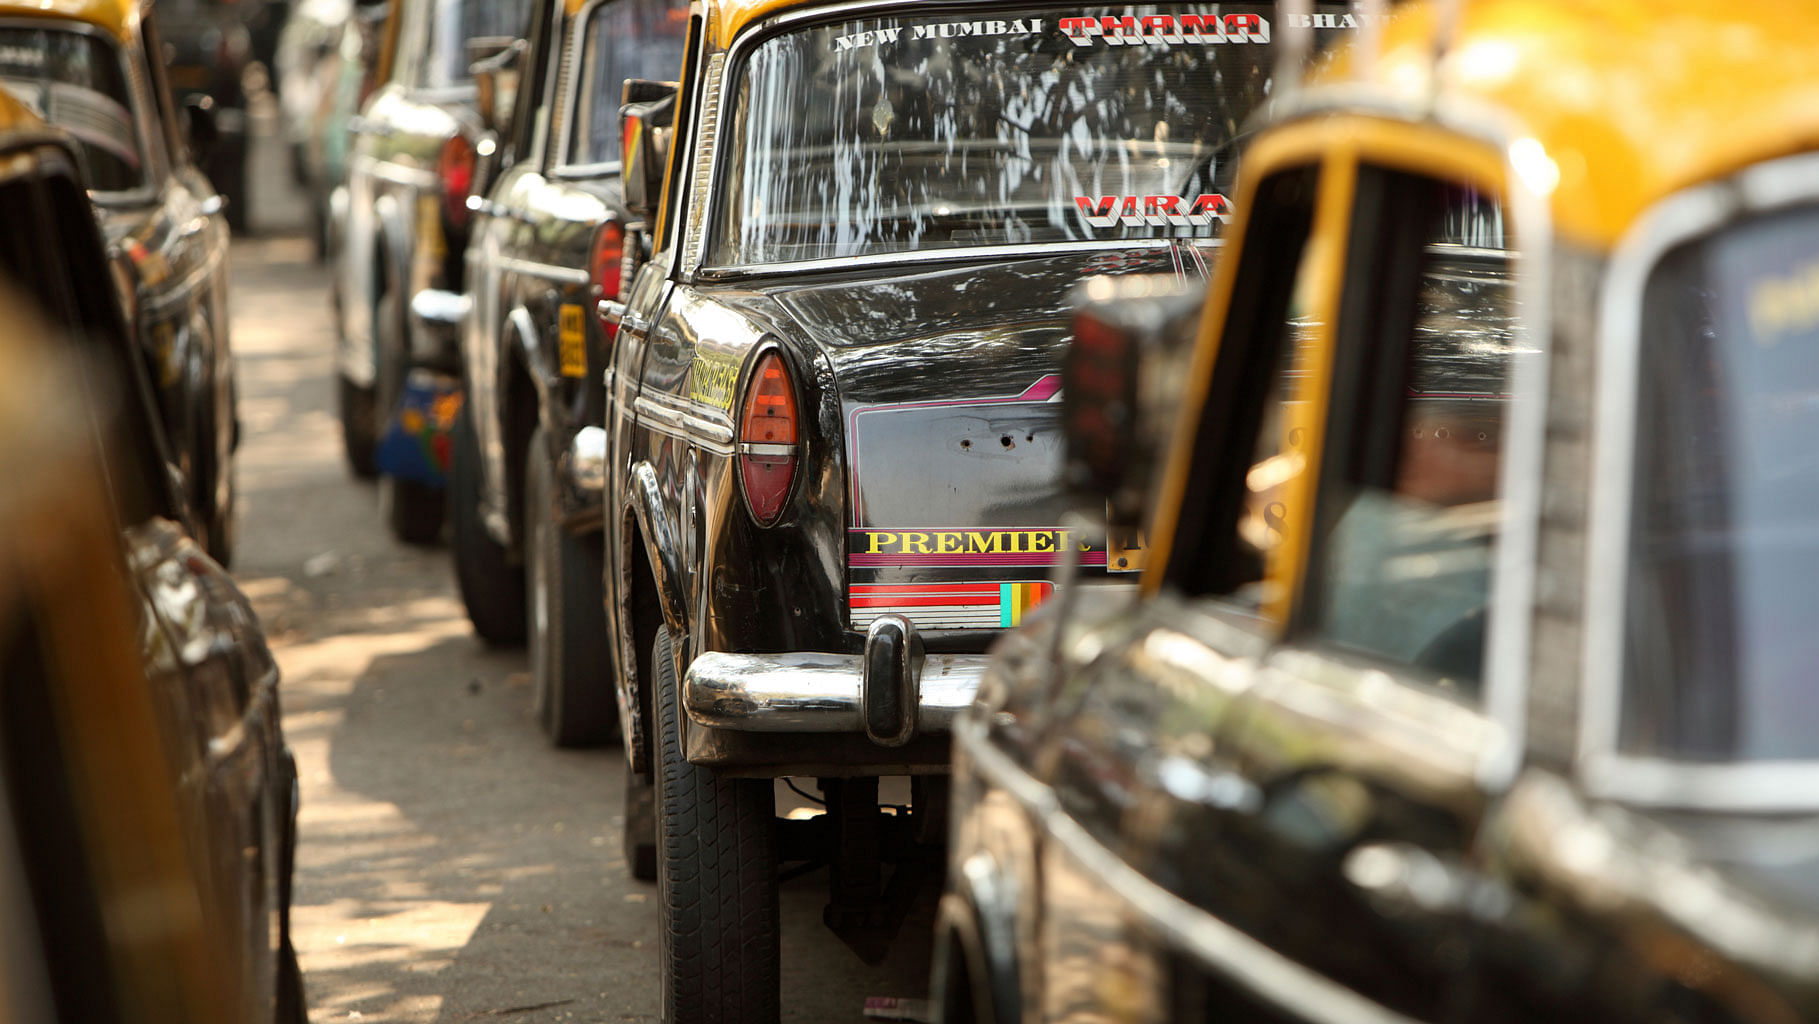 Taxis lined up in Mumbai. (Photo: IStockPhoto)